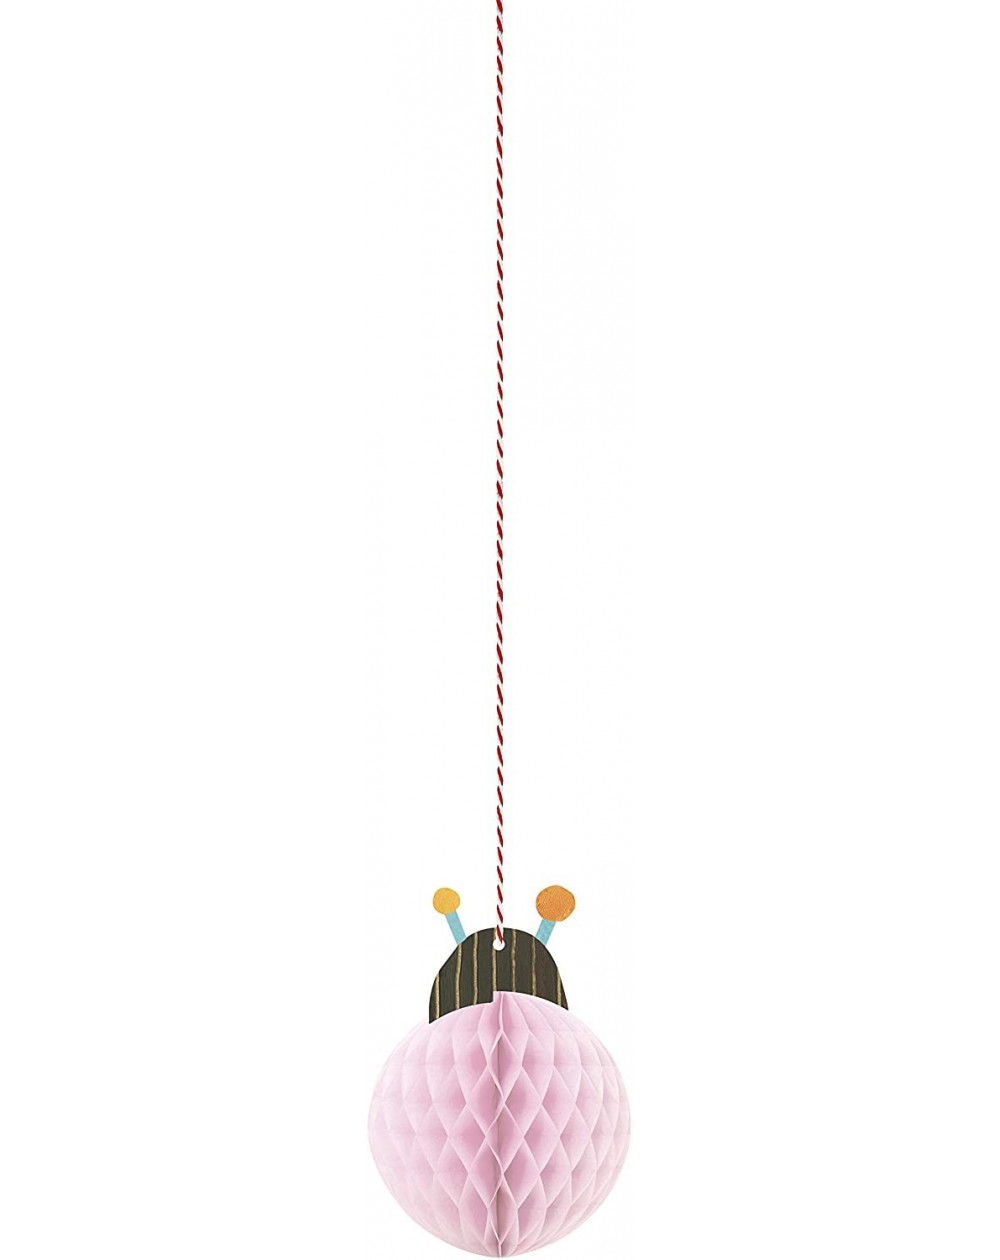 Banners Ladybug 1st Birthday Hanging Honeycomb Party Decorations 6"- 3 Ct- Multi (73334) - CF18QN3NY57 $8.52